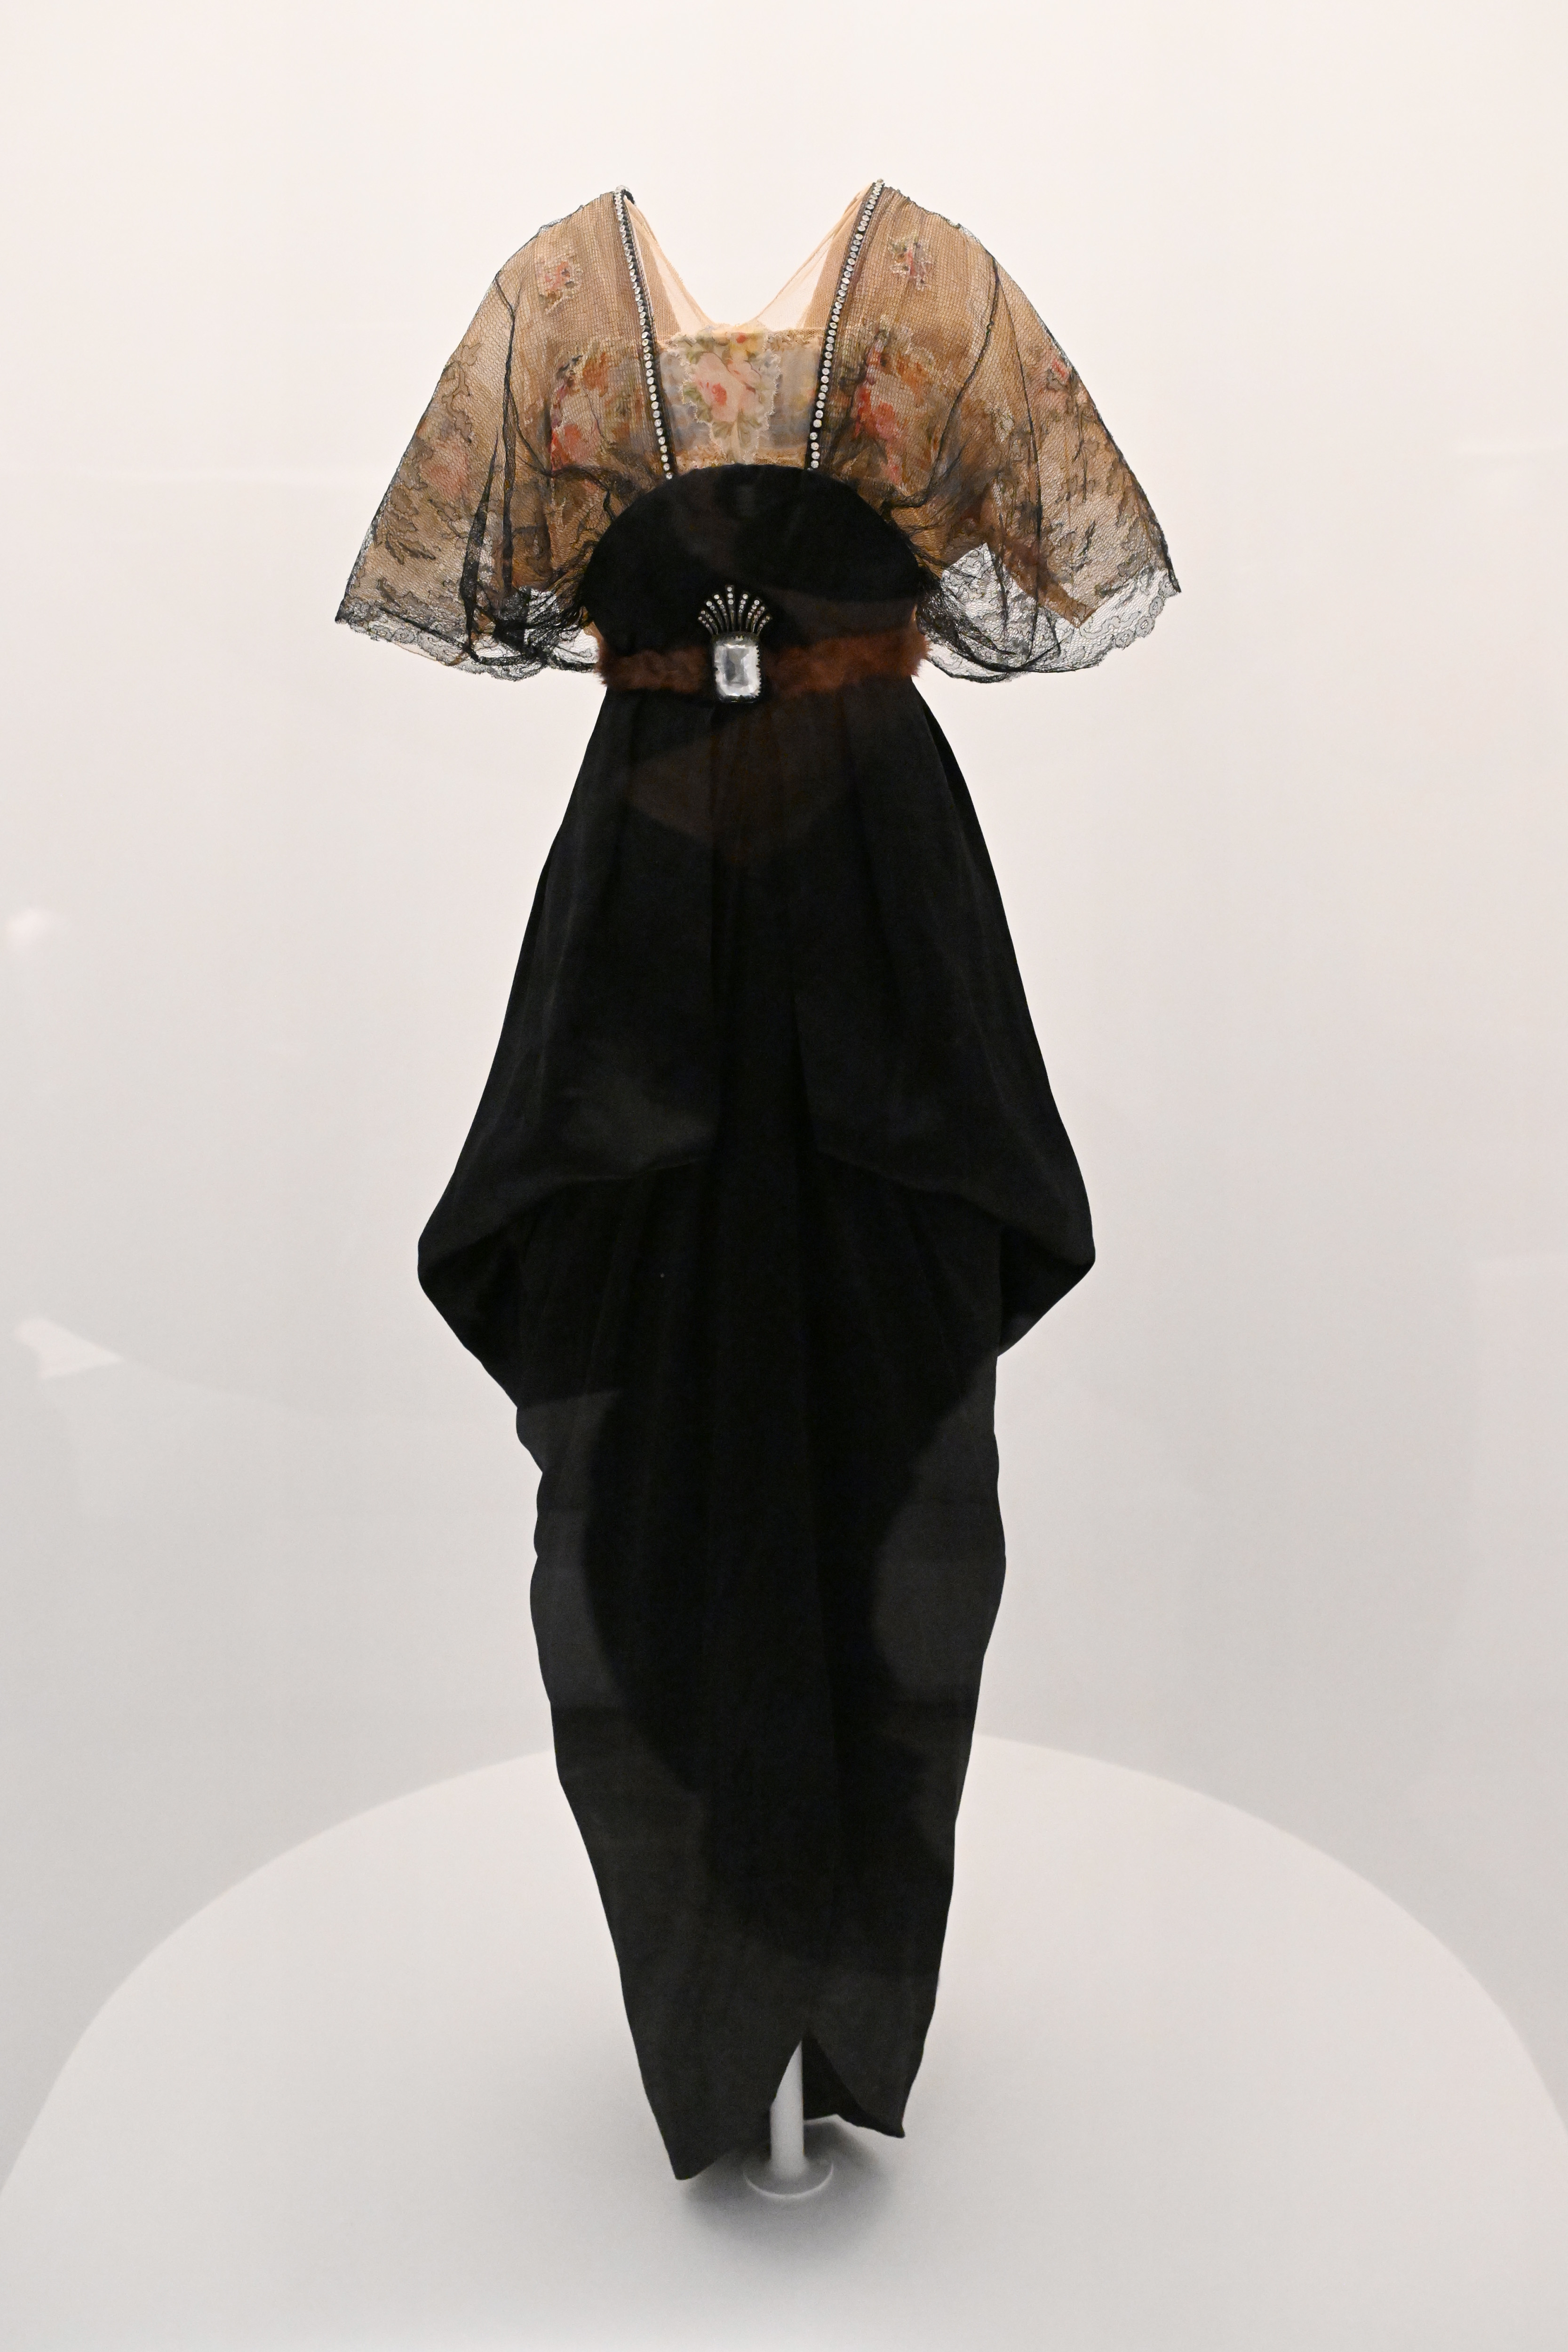 Black gown with lace detail on display, no people present